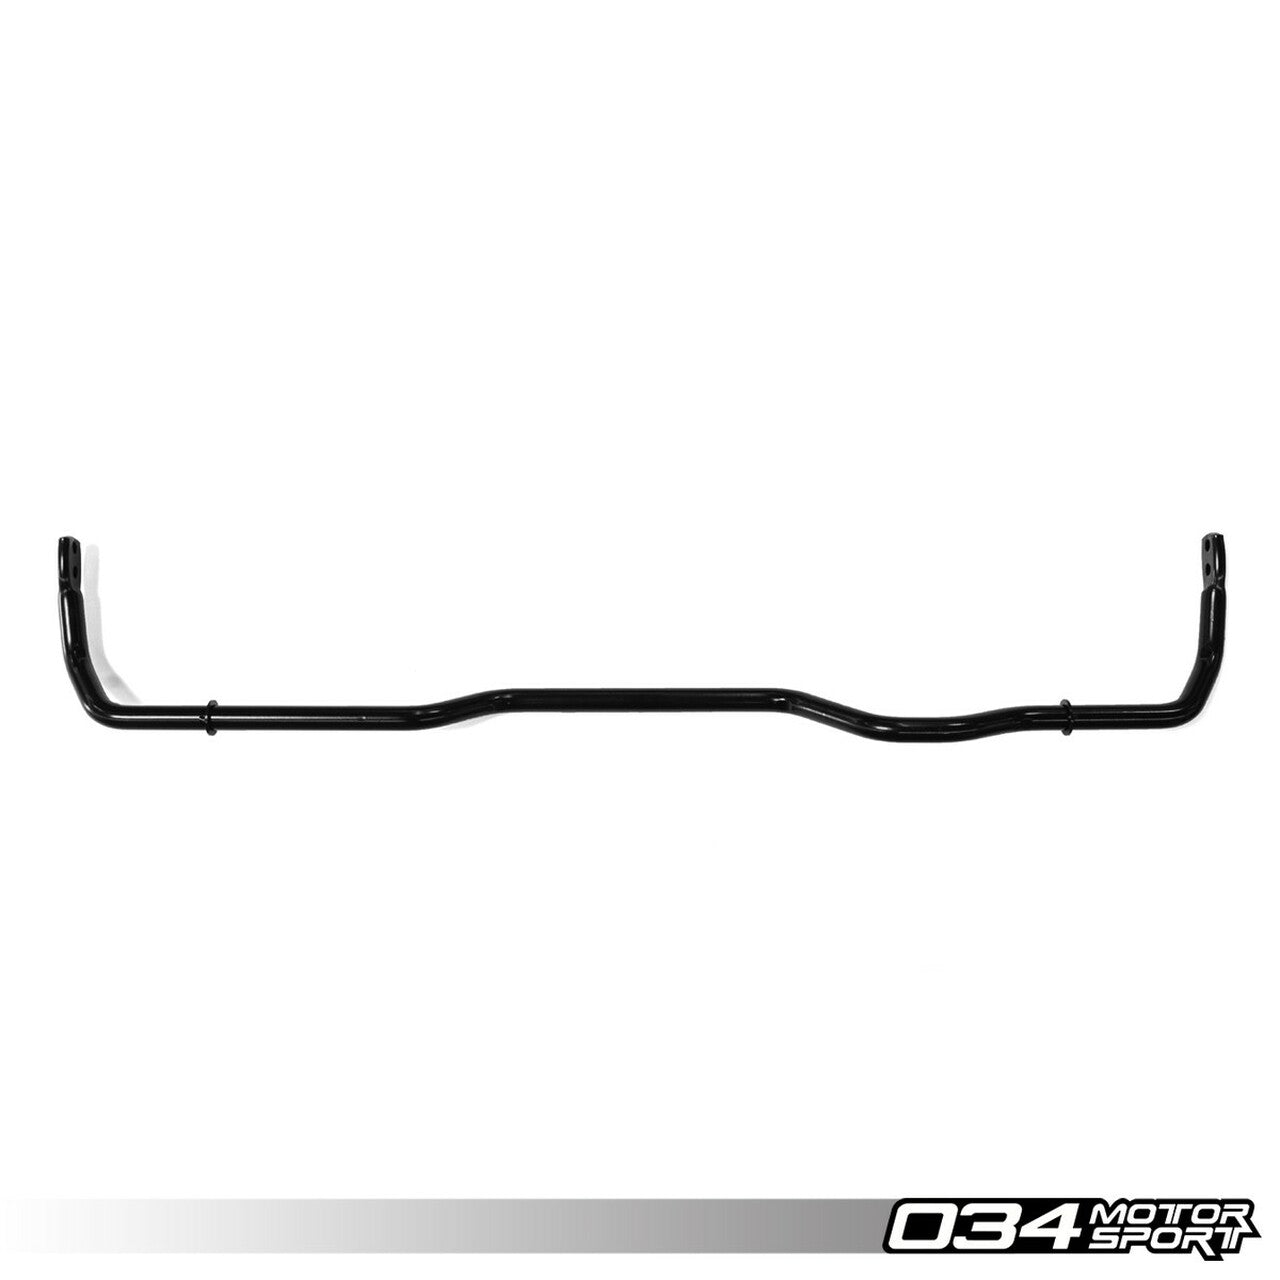 034Motorsport Solid Rear Sway Bar 22.25mm - TTRS (8J) and RS3 (8P) - Wayside Performance